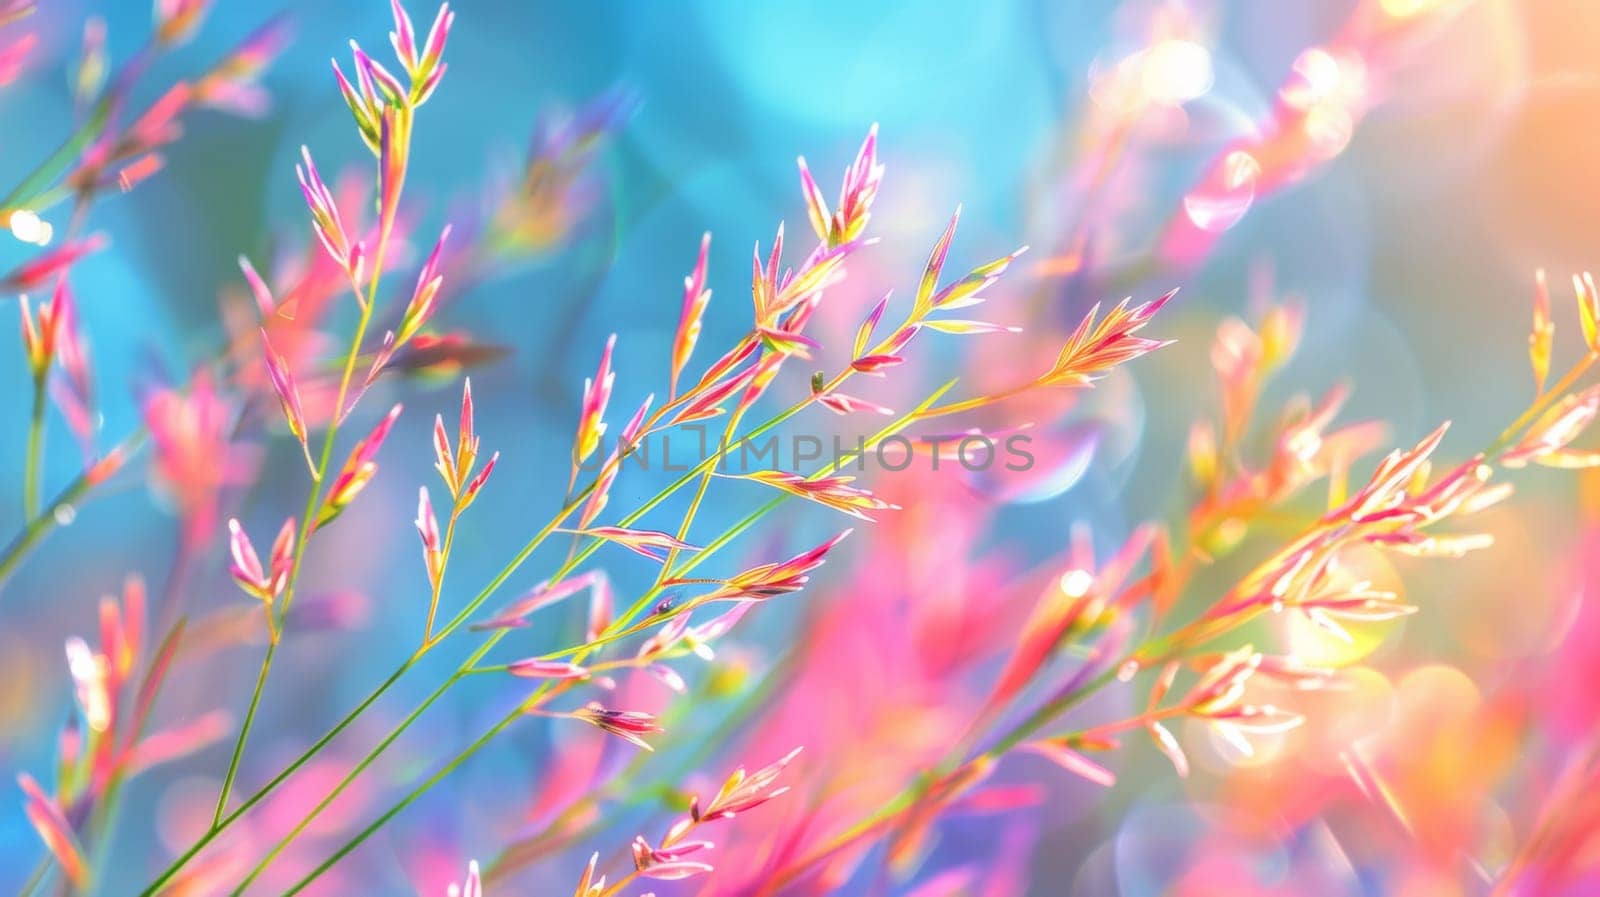 A close up of a bunch of pink flowers with some blue and yellow in the background, AI by starush